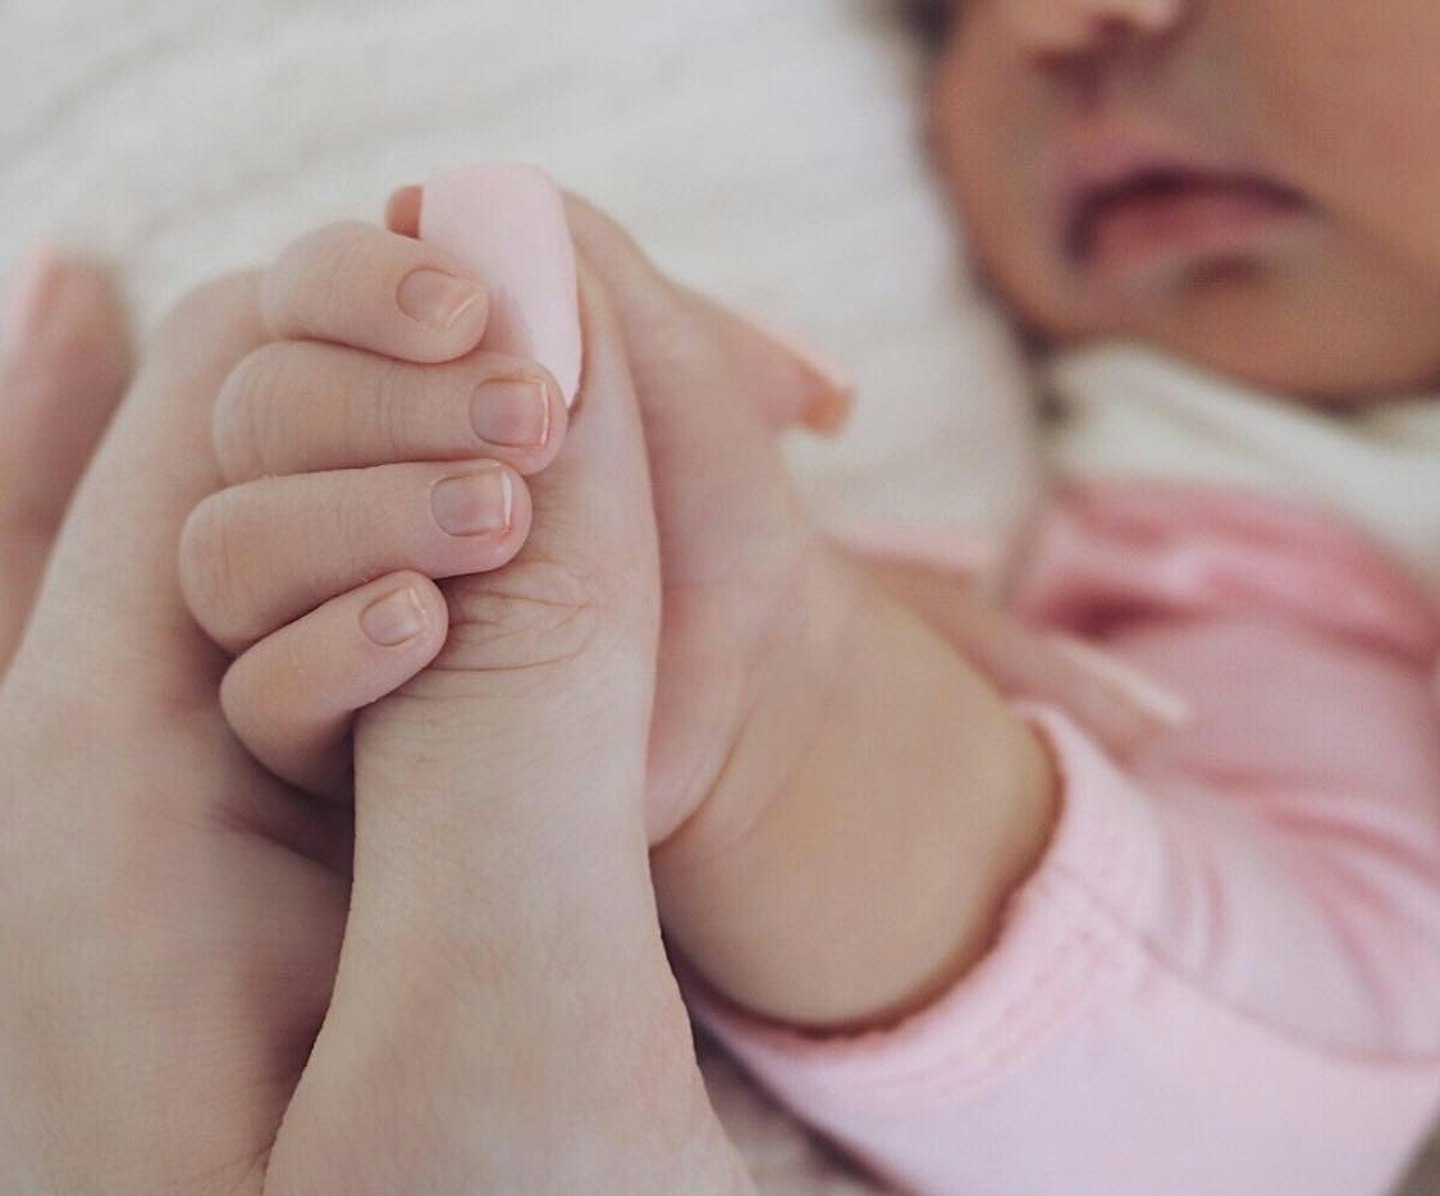 Kylie Jenner's baby, Stormi